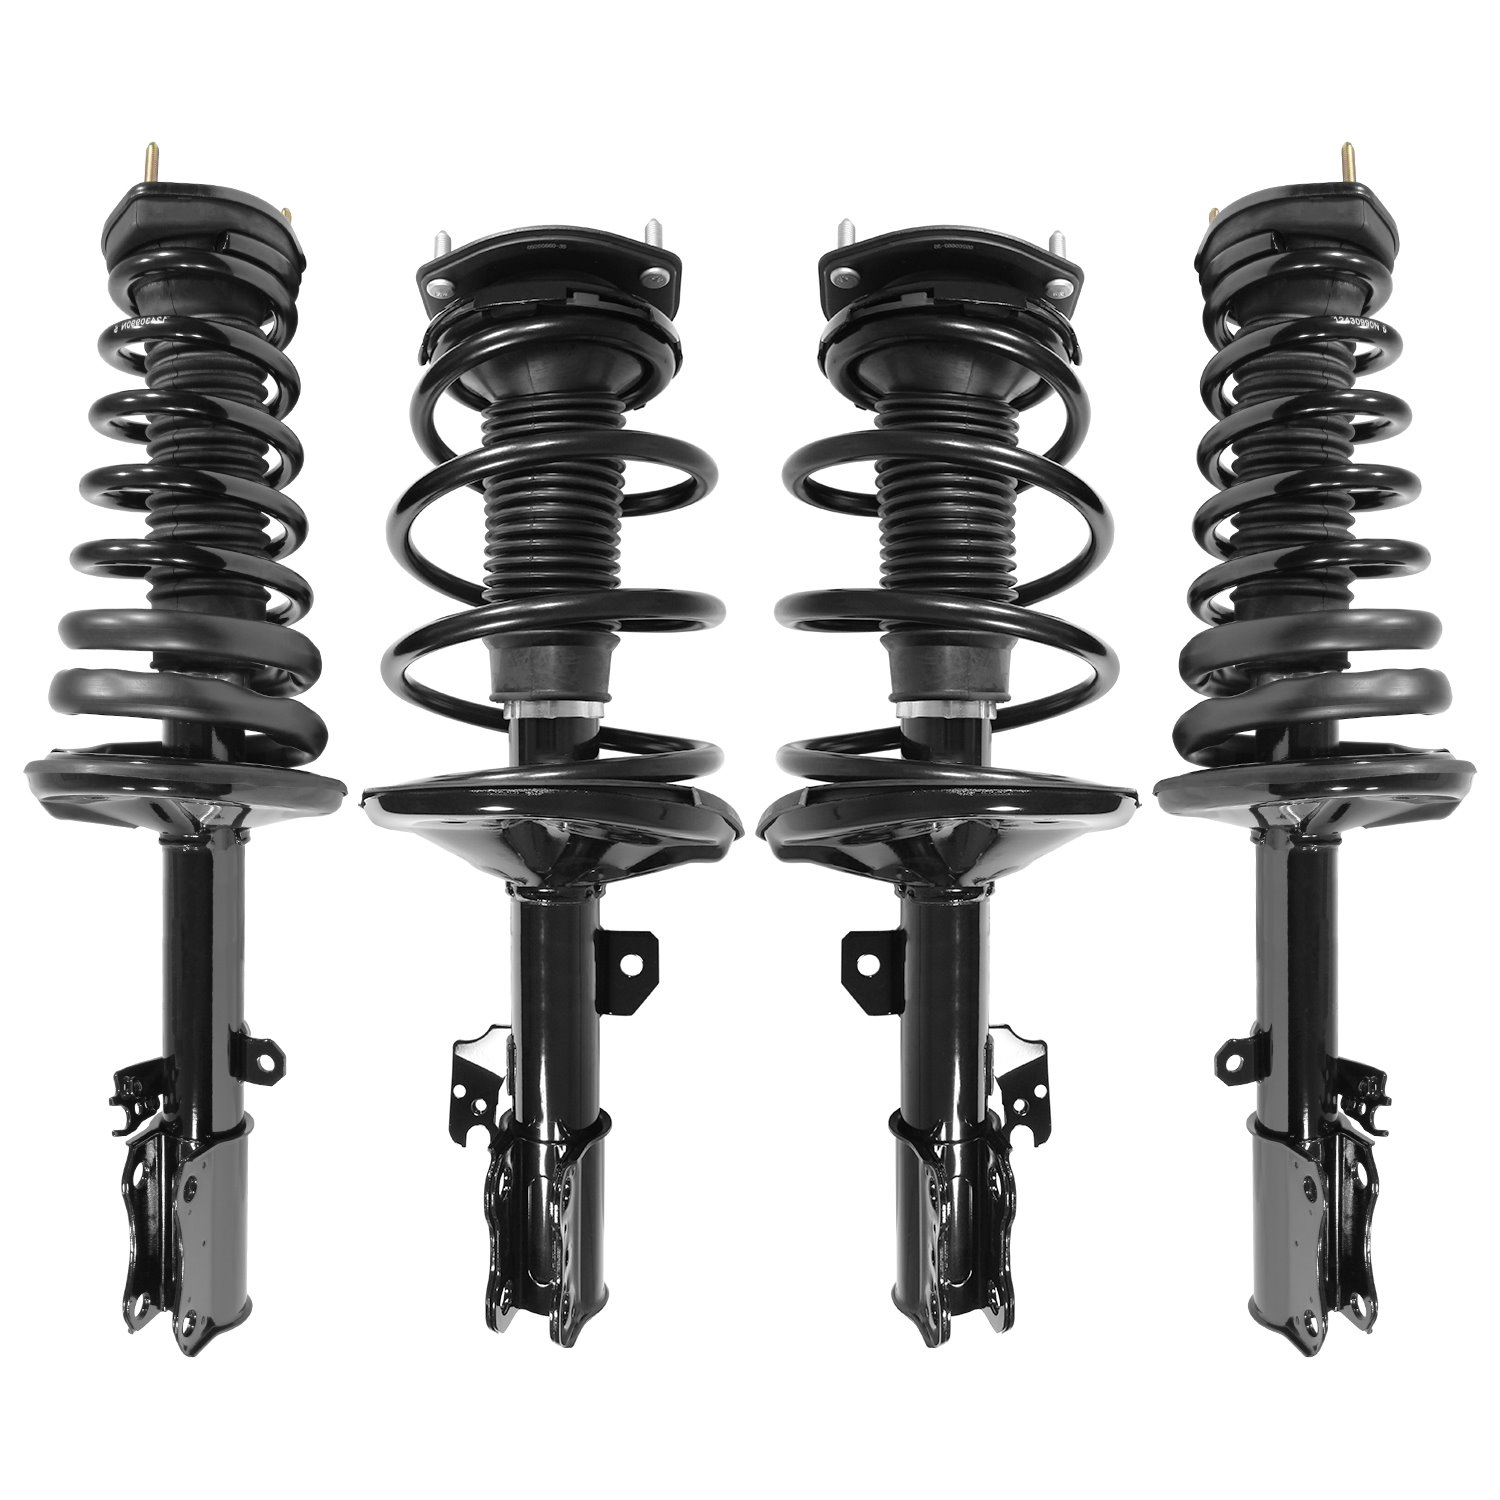 4-11701-15341-001 Front & Rear Suspension Strut & Coil Spring Assembly Kit Fits Select Lexus ES300, Toyota Camry